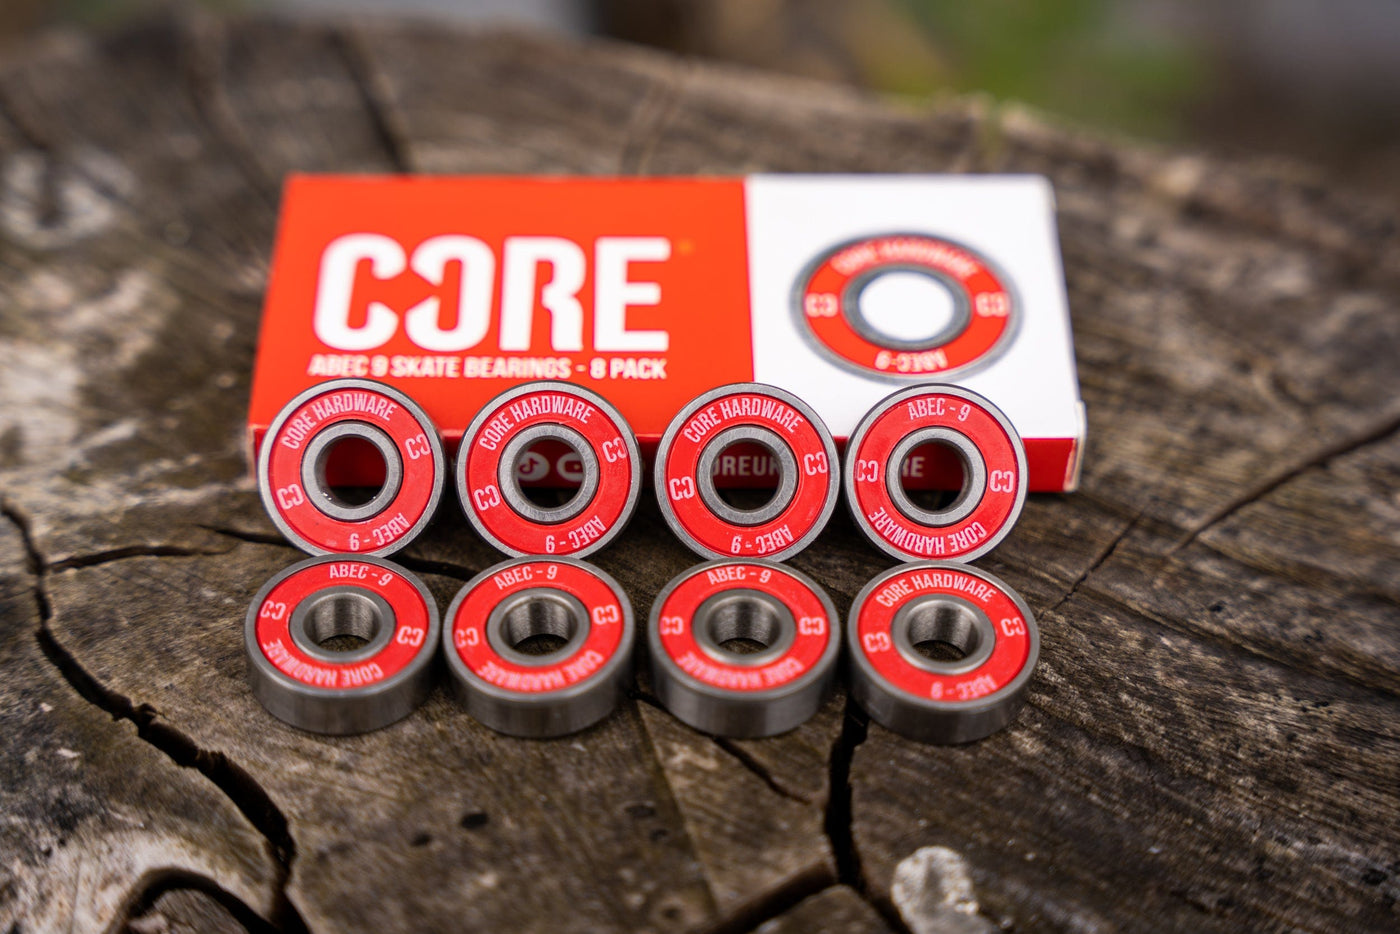 CORE ABEC 9 Skate Bearings Pack of 8 I Skate Board Bearings Packaging and Products